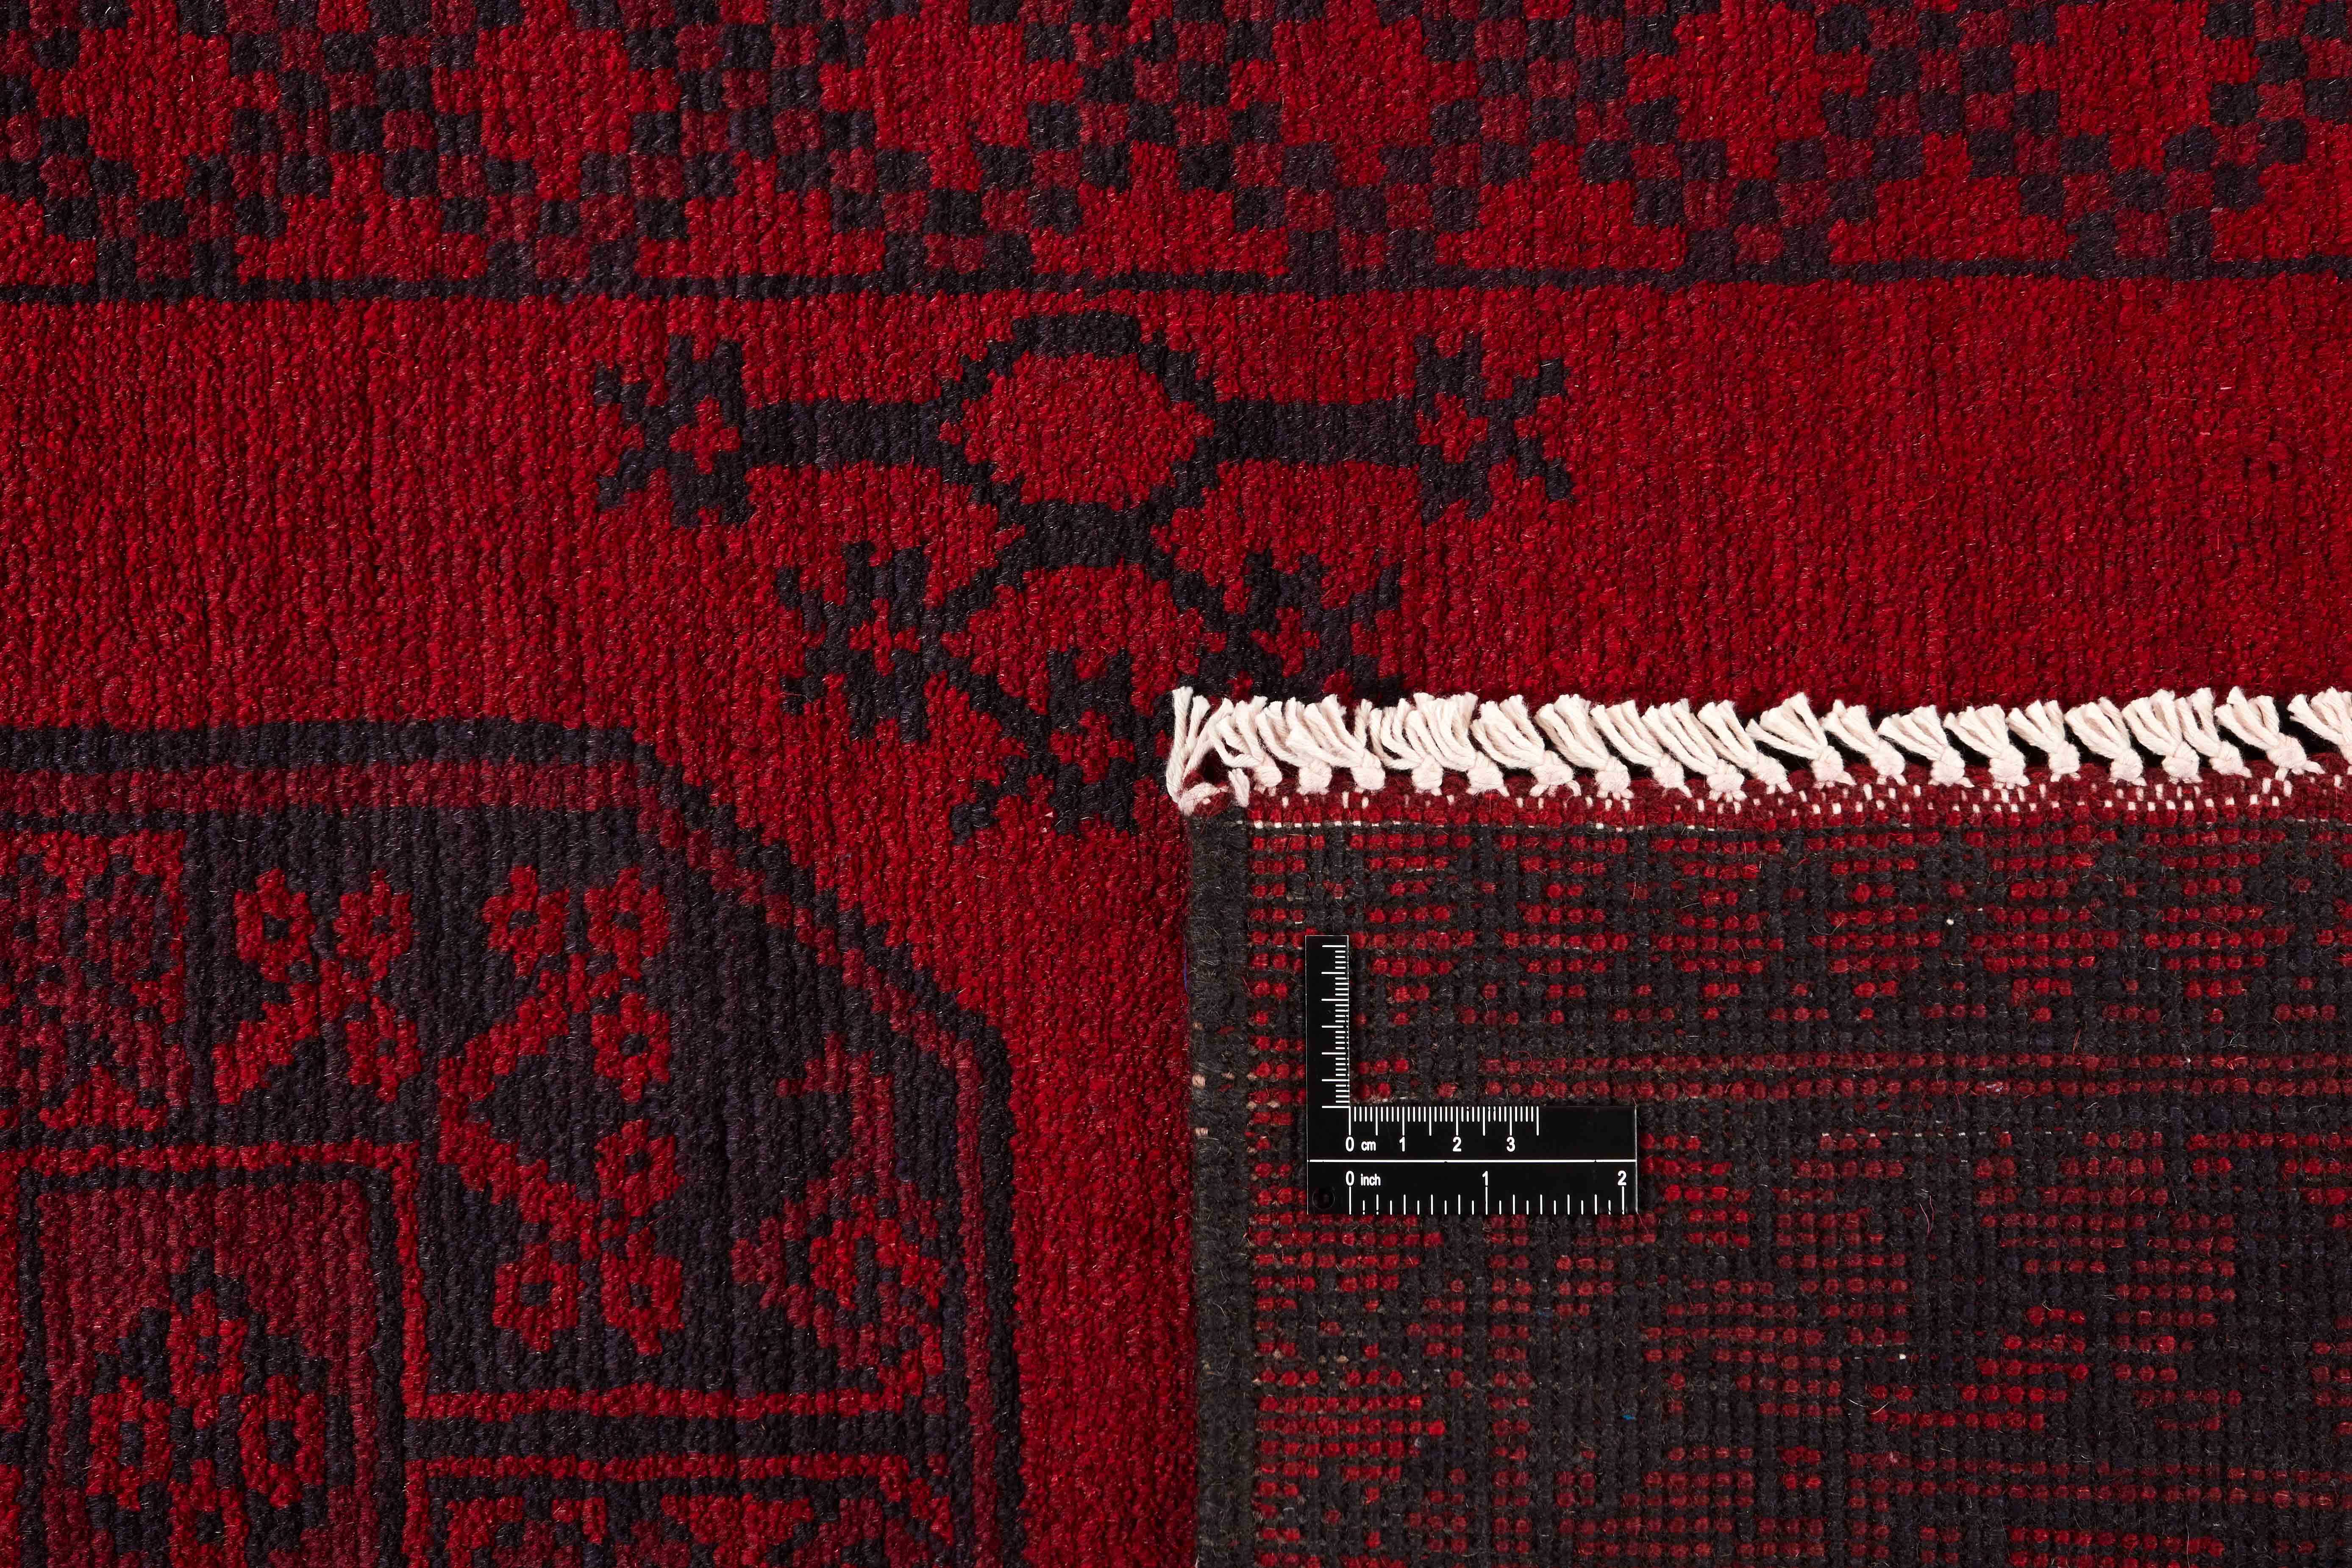 Red Oriental wool runner with a traditional elephant's foot pattern